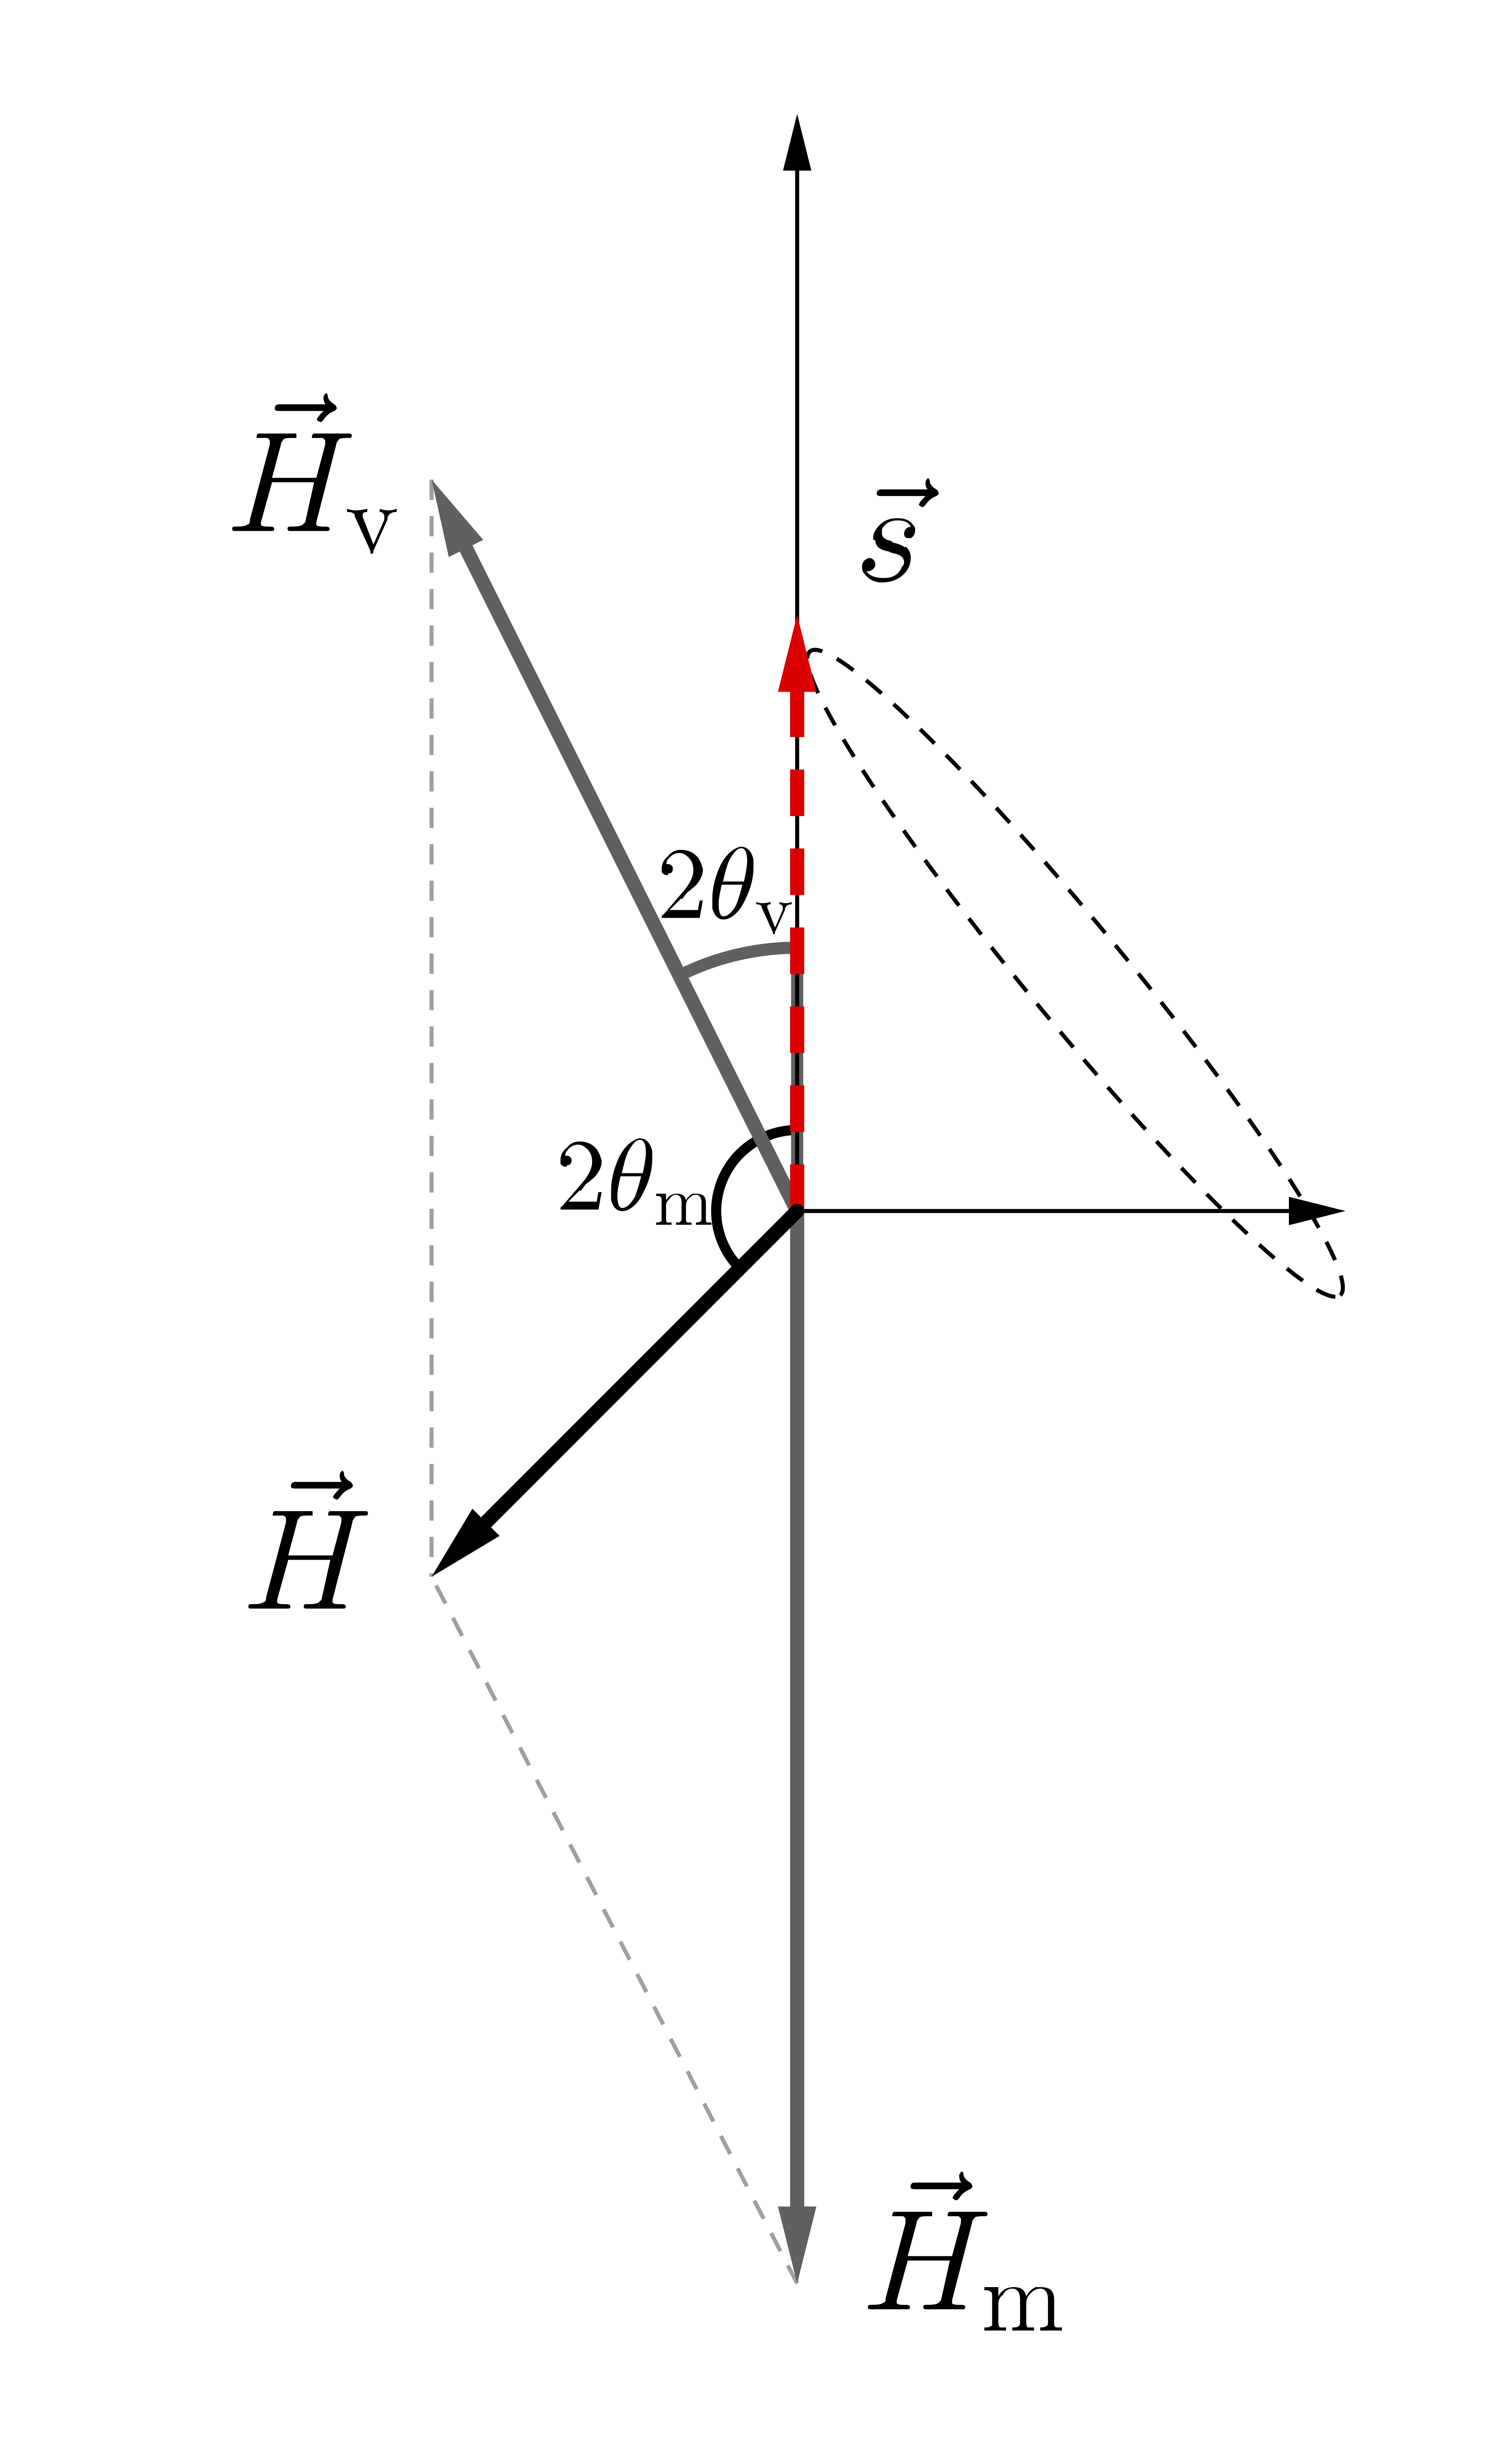 Neutrino oscillations in flavor isospin picture with the presence of matter potential. The flavor isospin is denoted as red-dashed arrow. The two gray vectors stand for the vacuum Hamiltonians $\vec H_{\mathrm v}$ and matter potential $\vec H_{\mathrm m}$.